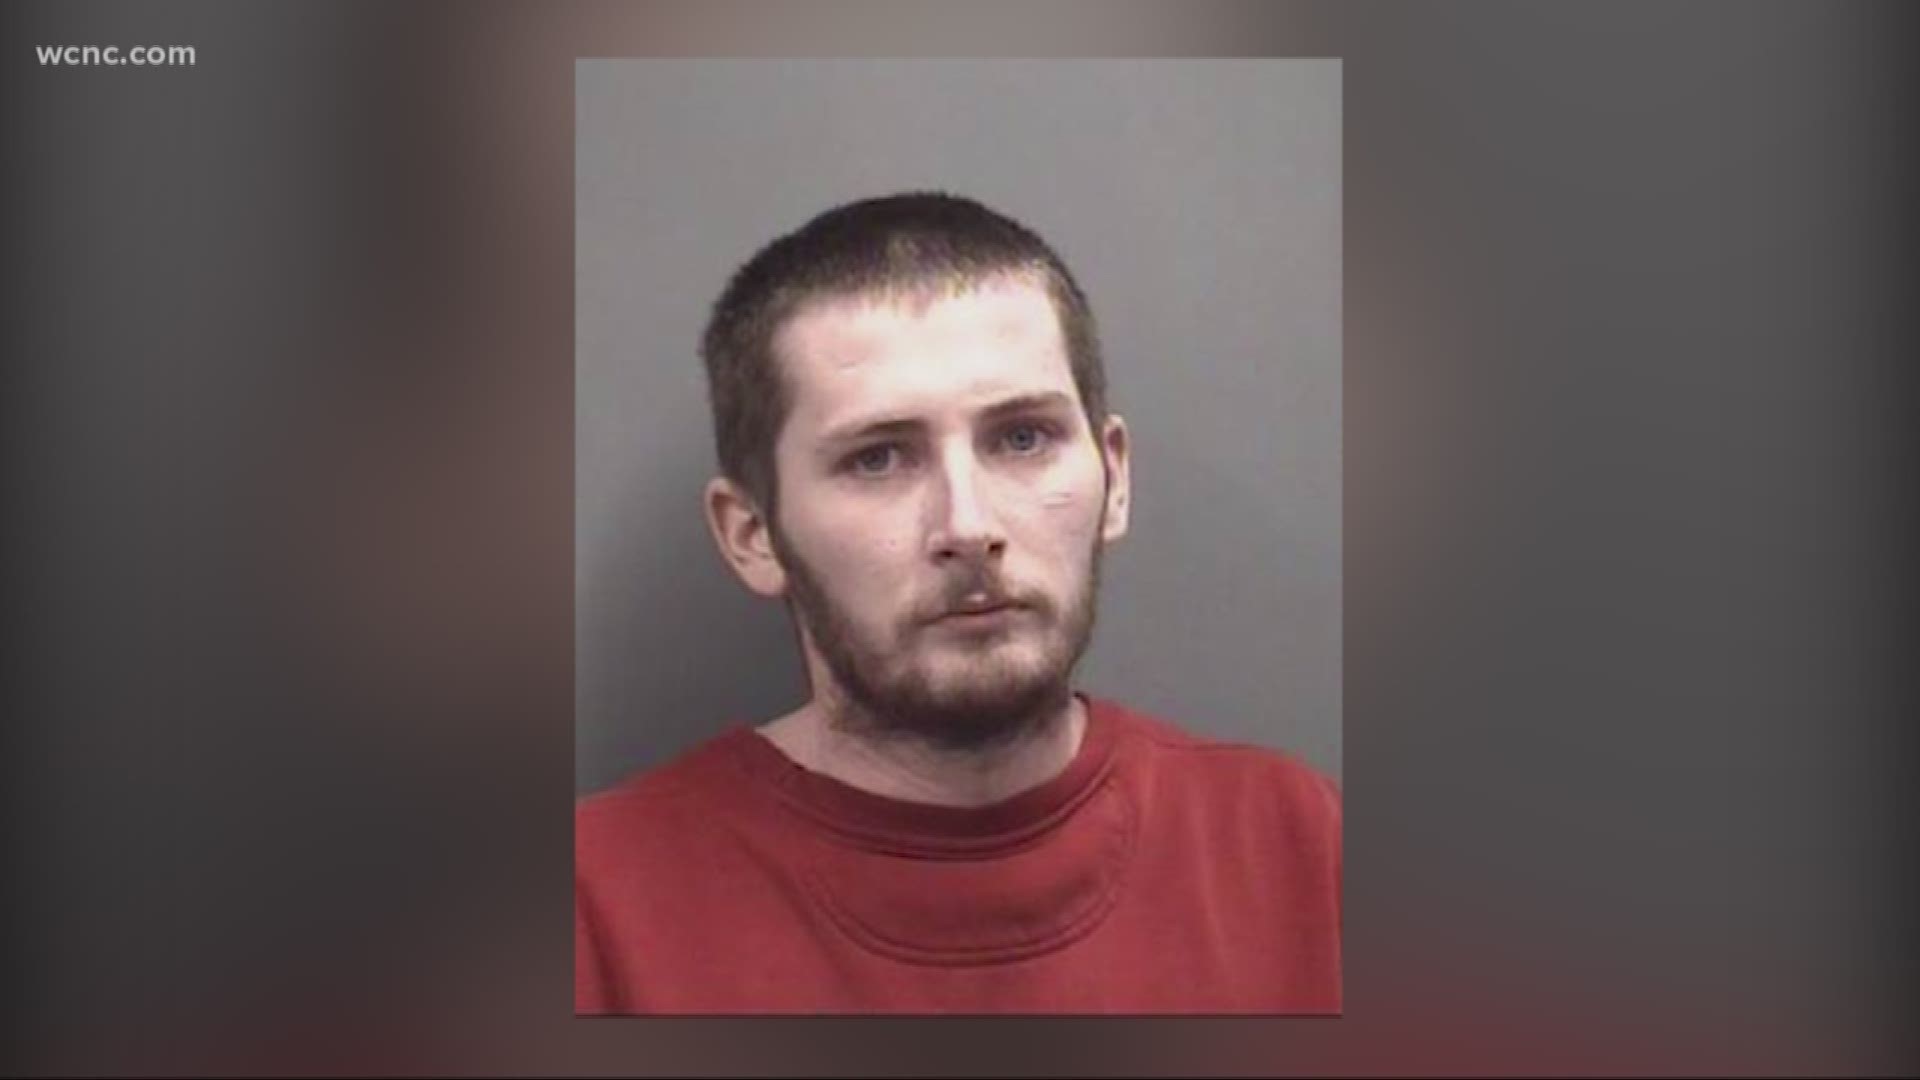 29-year-old Jake Kelly is facing new charges after detectives say he planned to meet up with the same victim for sex. New charges come after Kelly was arrested in December, accused of kidnapping a runaway child.